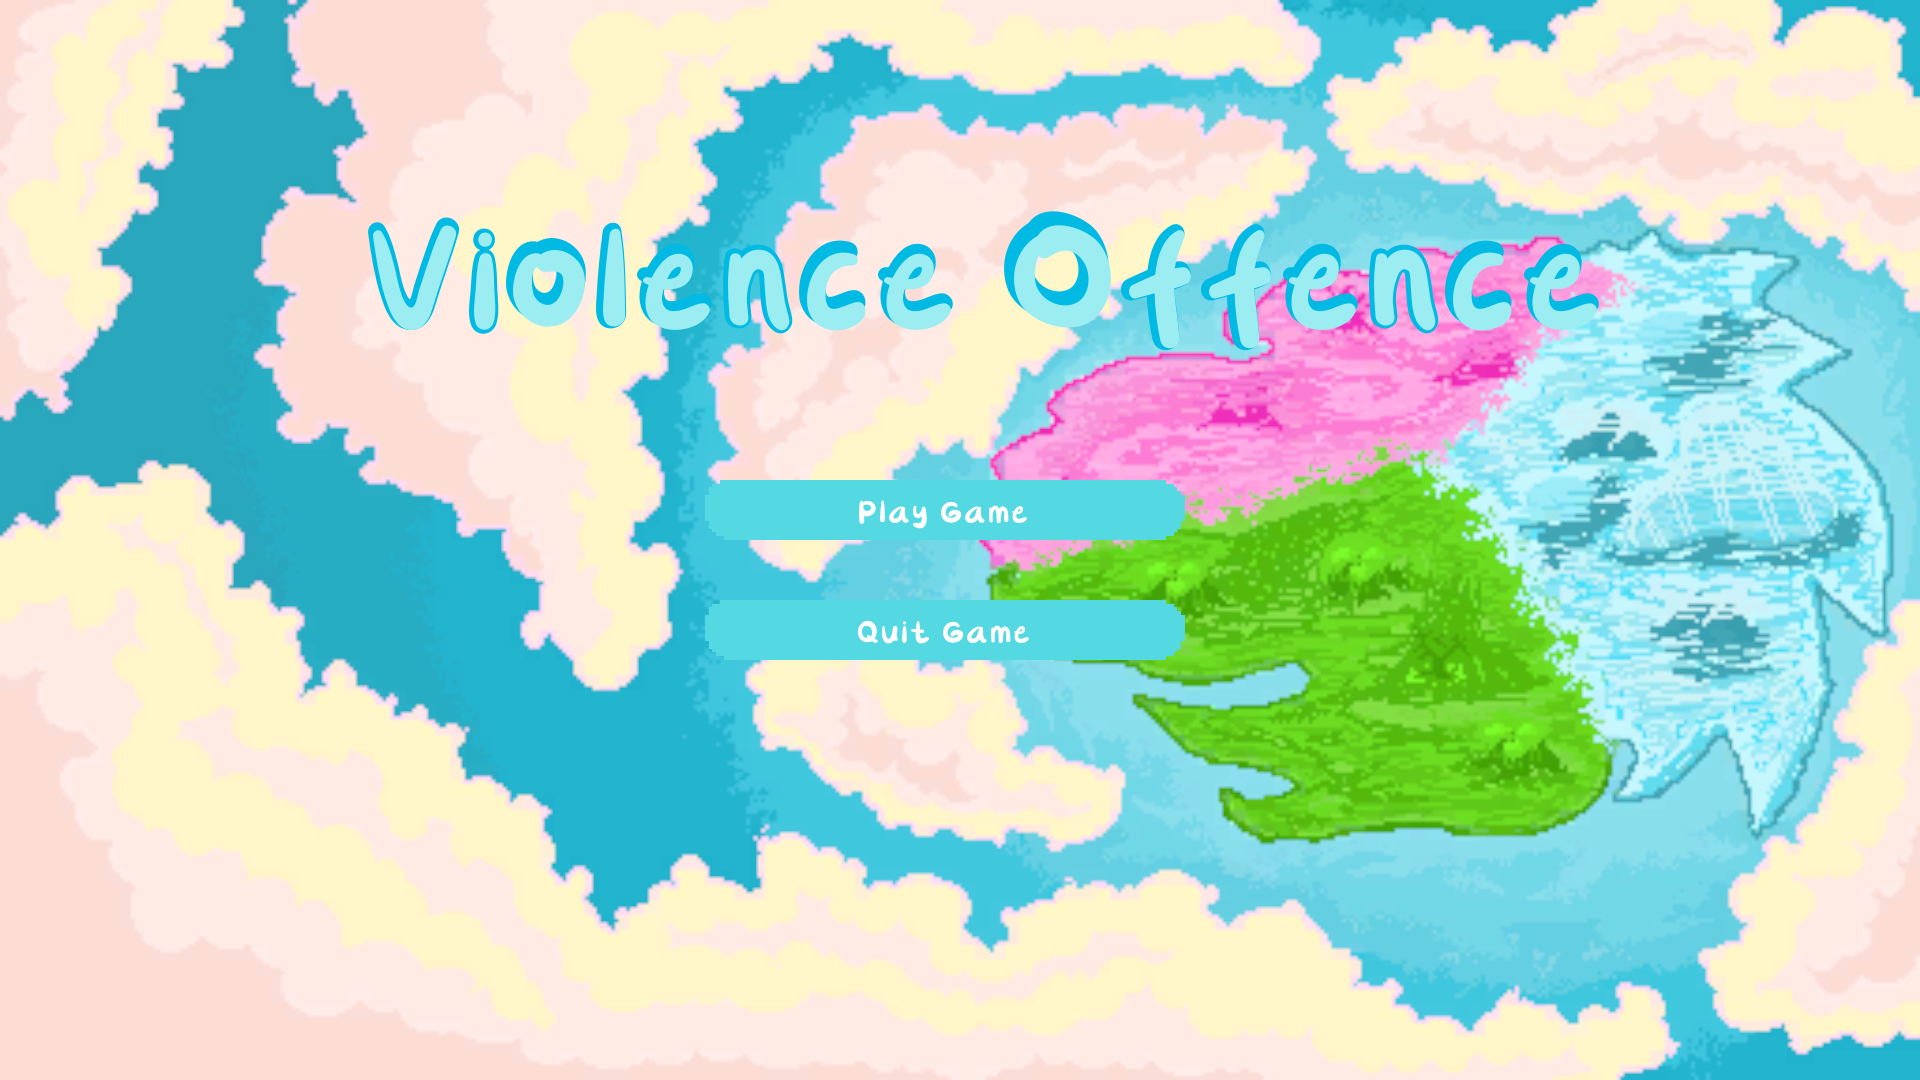 Violence Offence